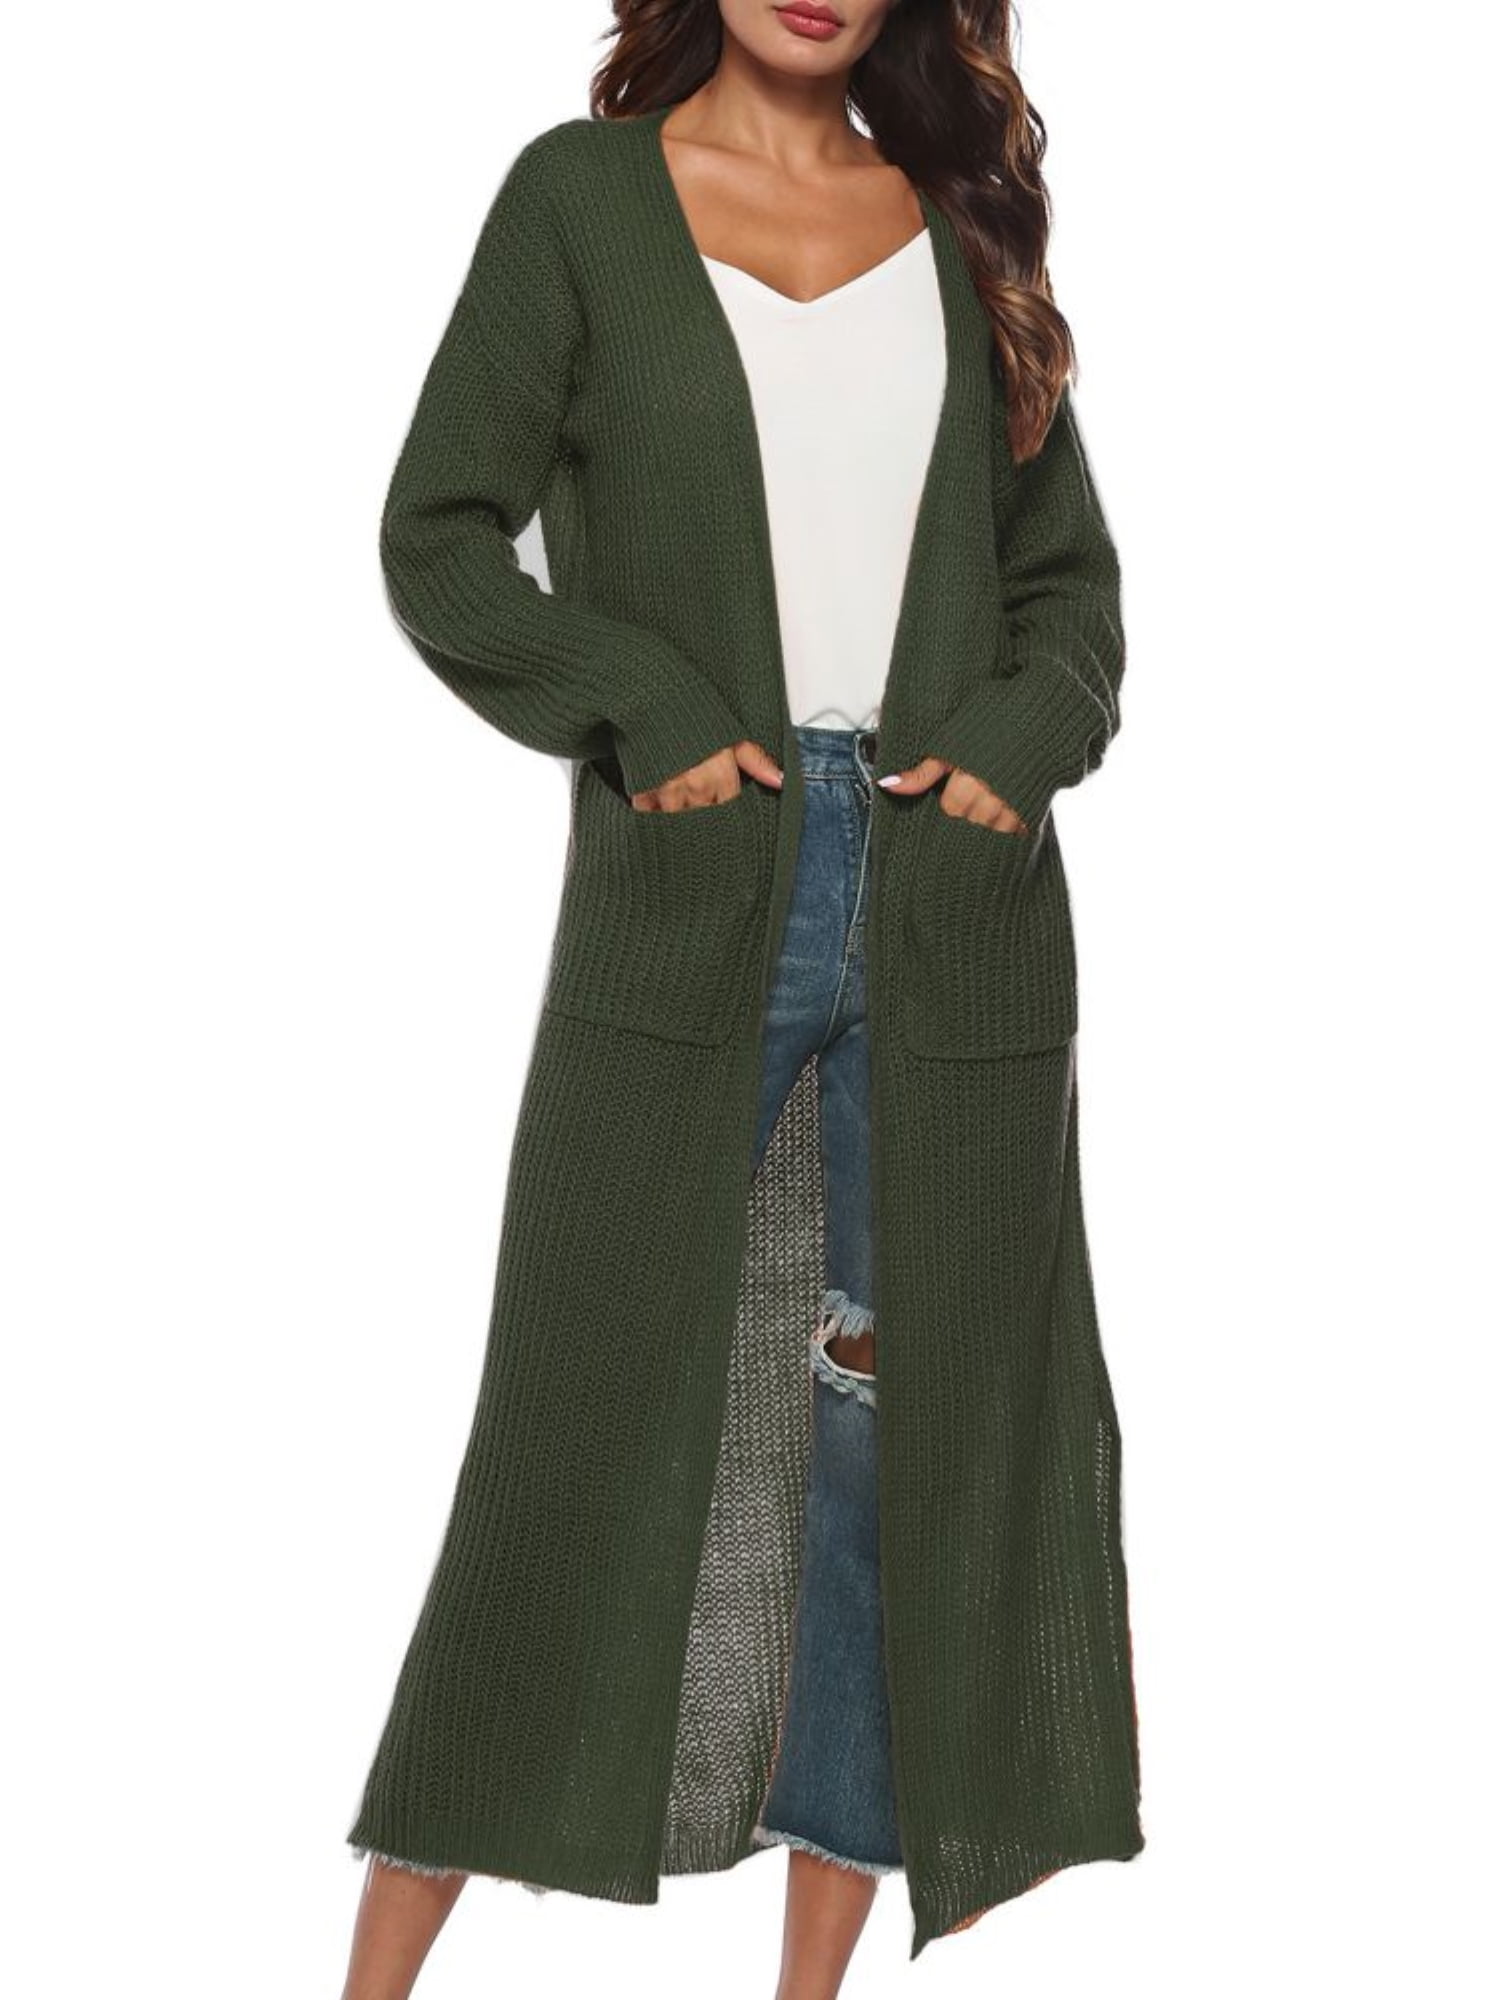 Cardigan for Women Fashion Loose Lightweight Plus Size Coat Open Drape Long Sleeve Casual Outwear with Pocket 